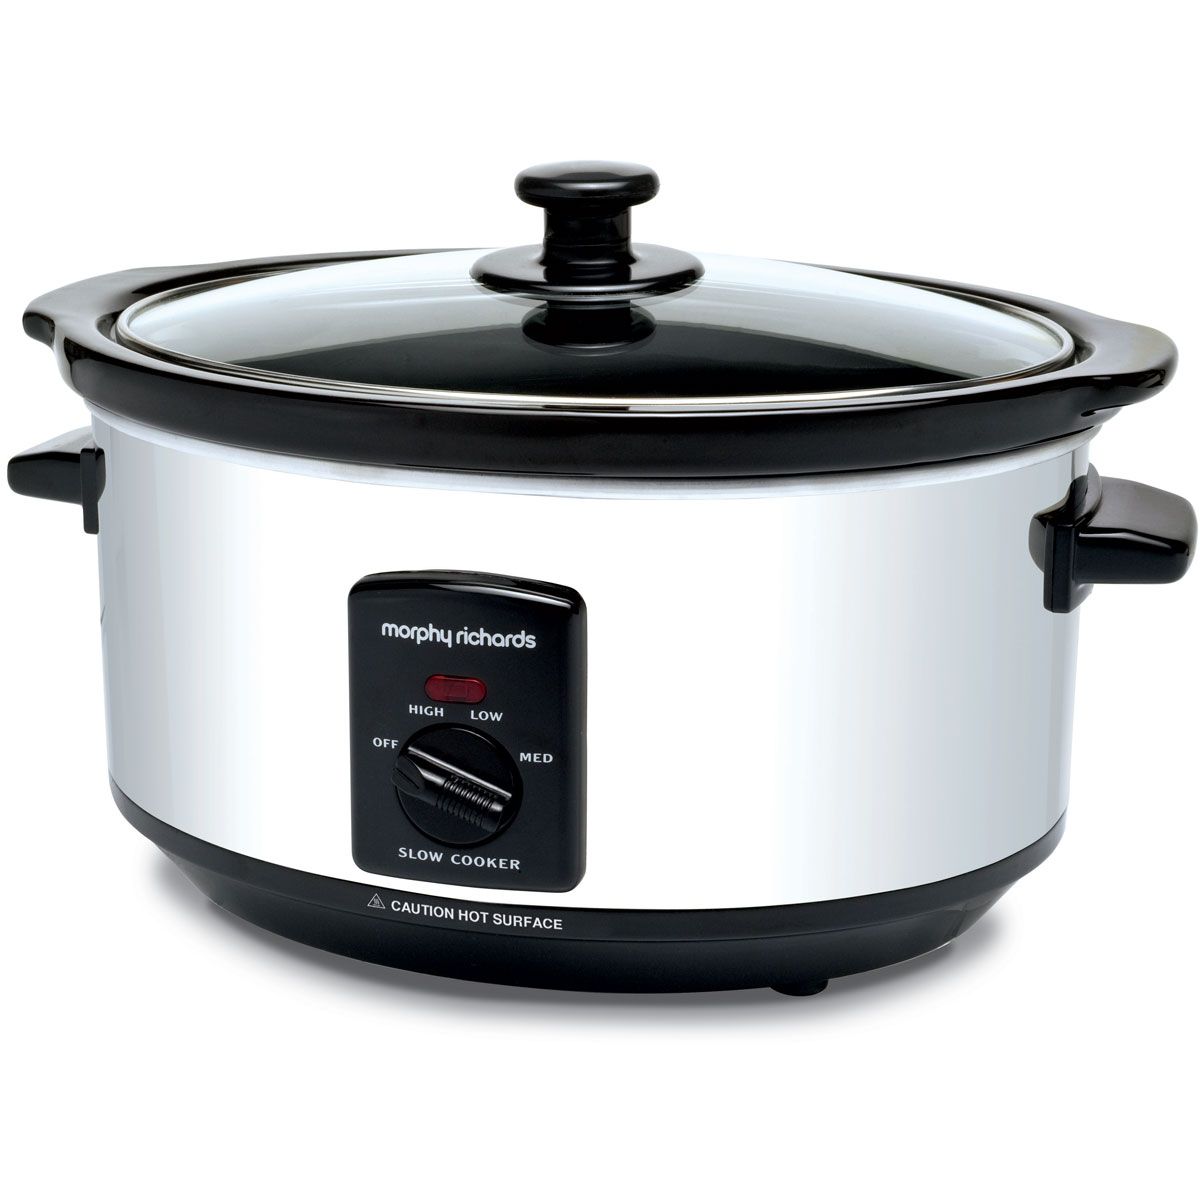 Morphy Richards 3.5L Polished Stainless Steel Slow Cooker with Removable Pot